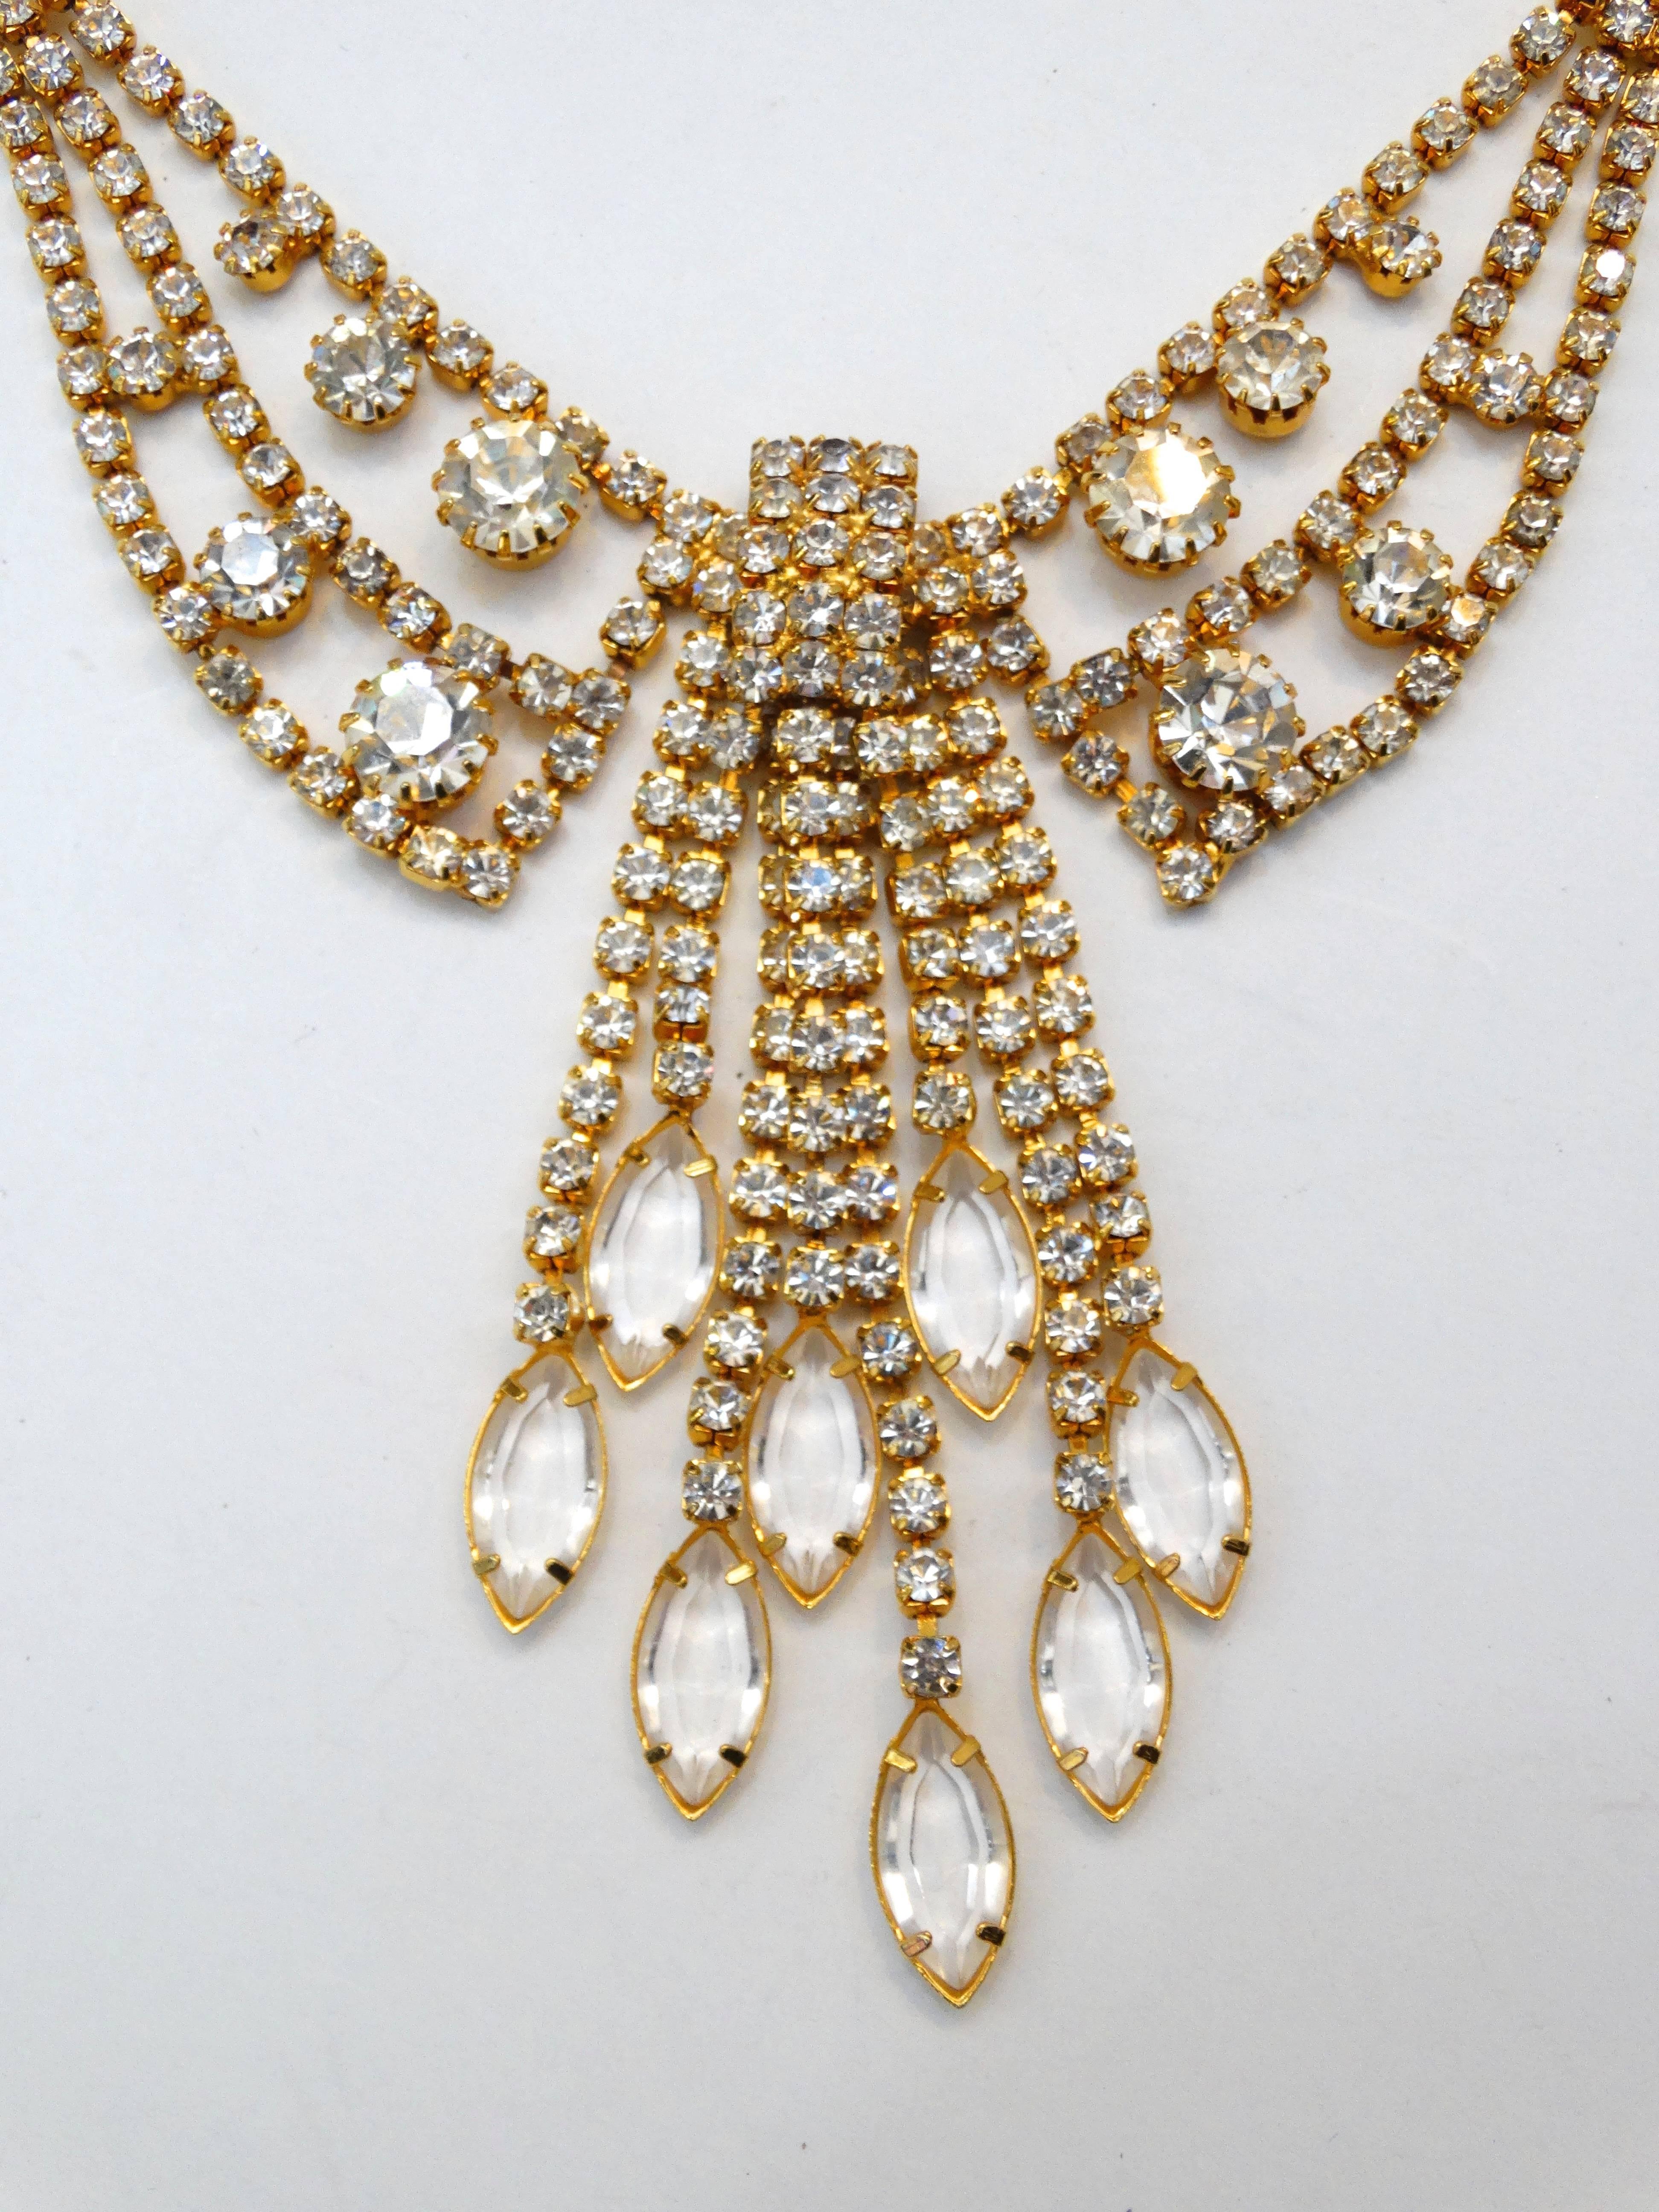 Accessorize with some sparkle with this incredible 1960s rhinestone bib necklace! Rows of brilliantly cut rhinestones set in gold toned metal. Accented with various sizes of rhinestones throughout. Collar style necklace with a strands of rhinestones